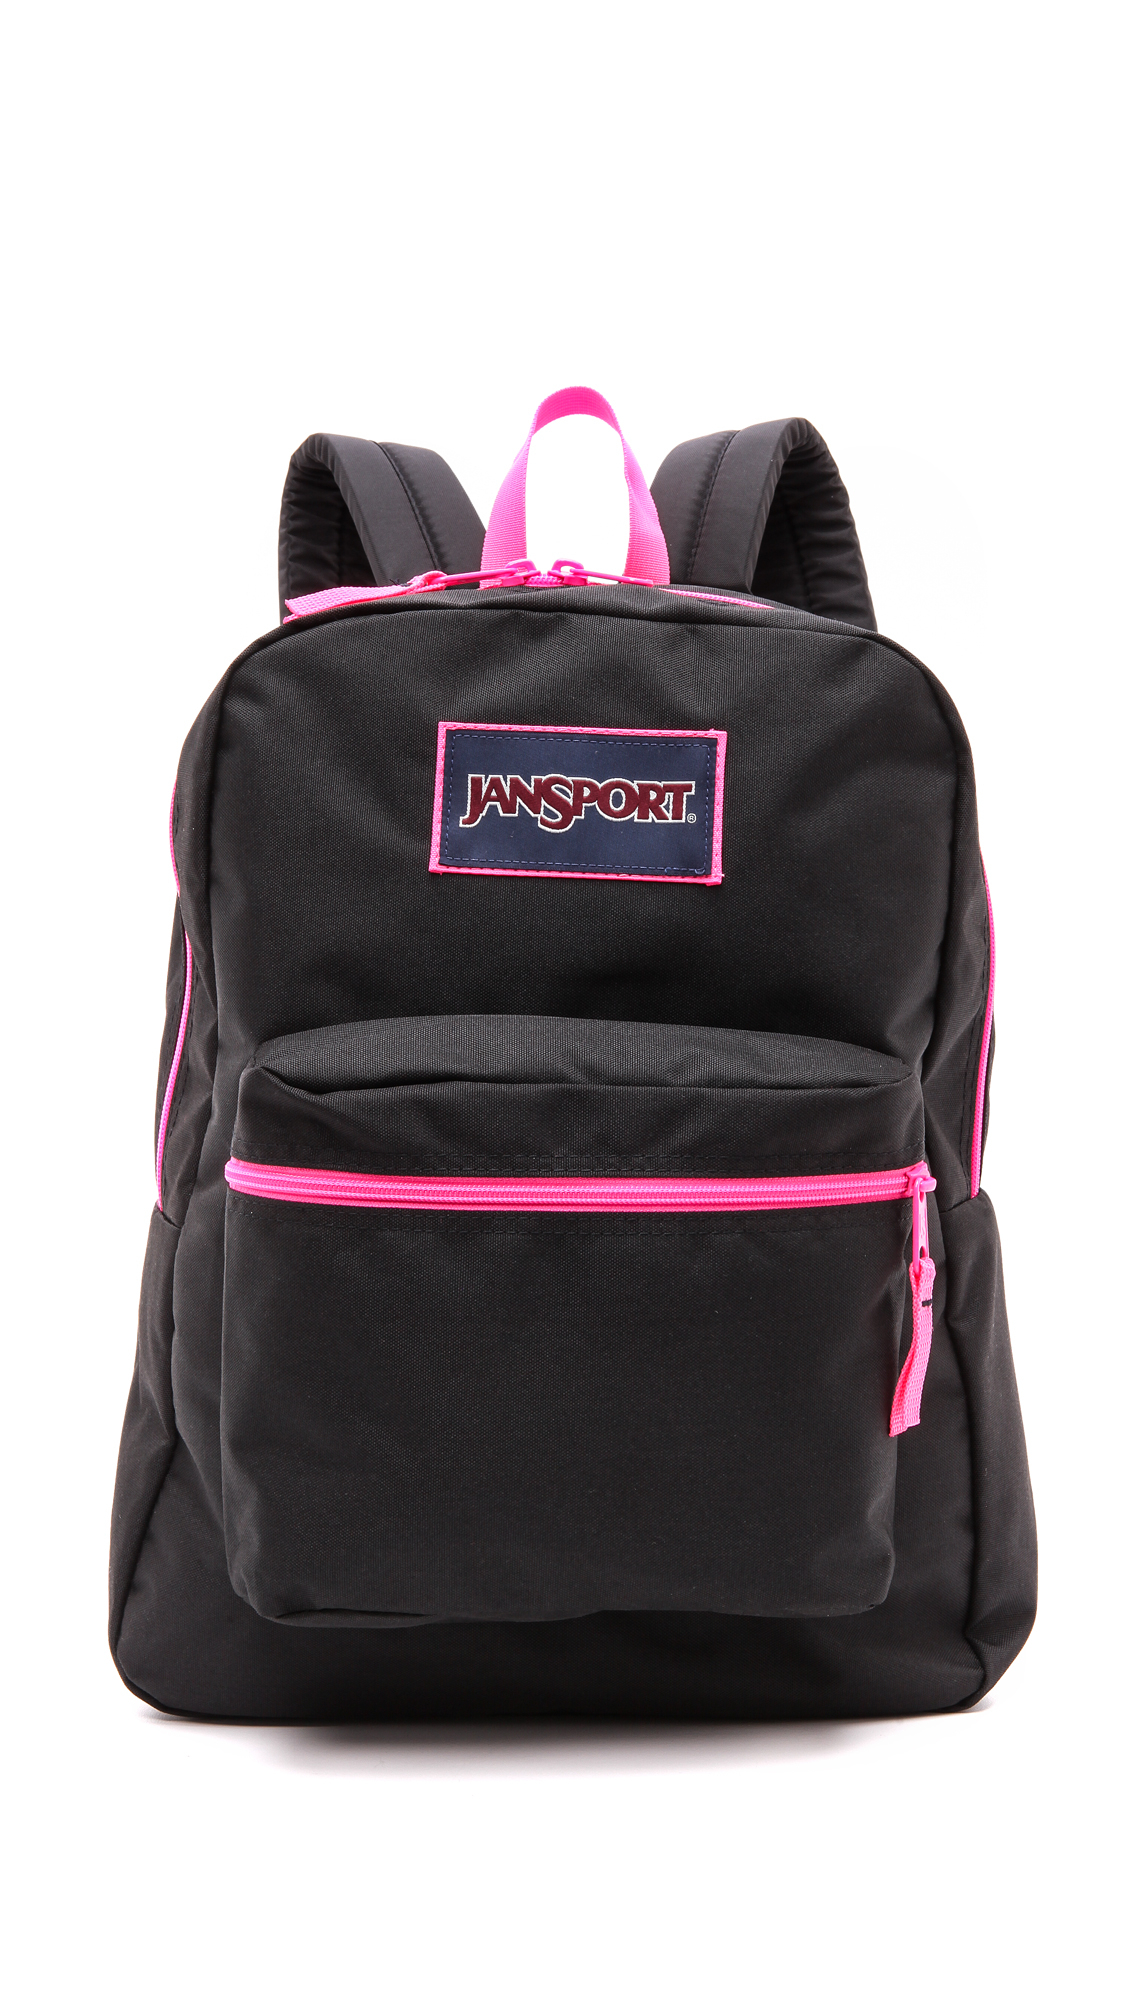 Jansport Classic Overexposed Backpack - Black And Fluorescent Pink - Lyst